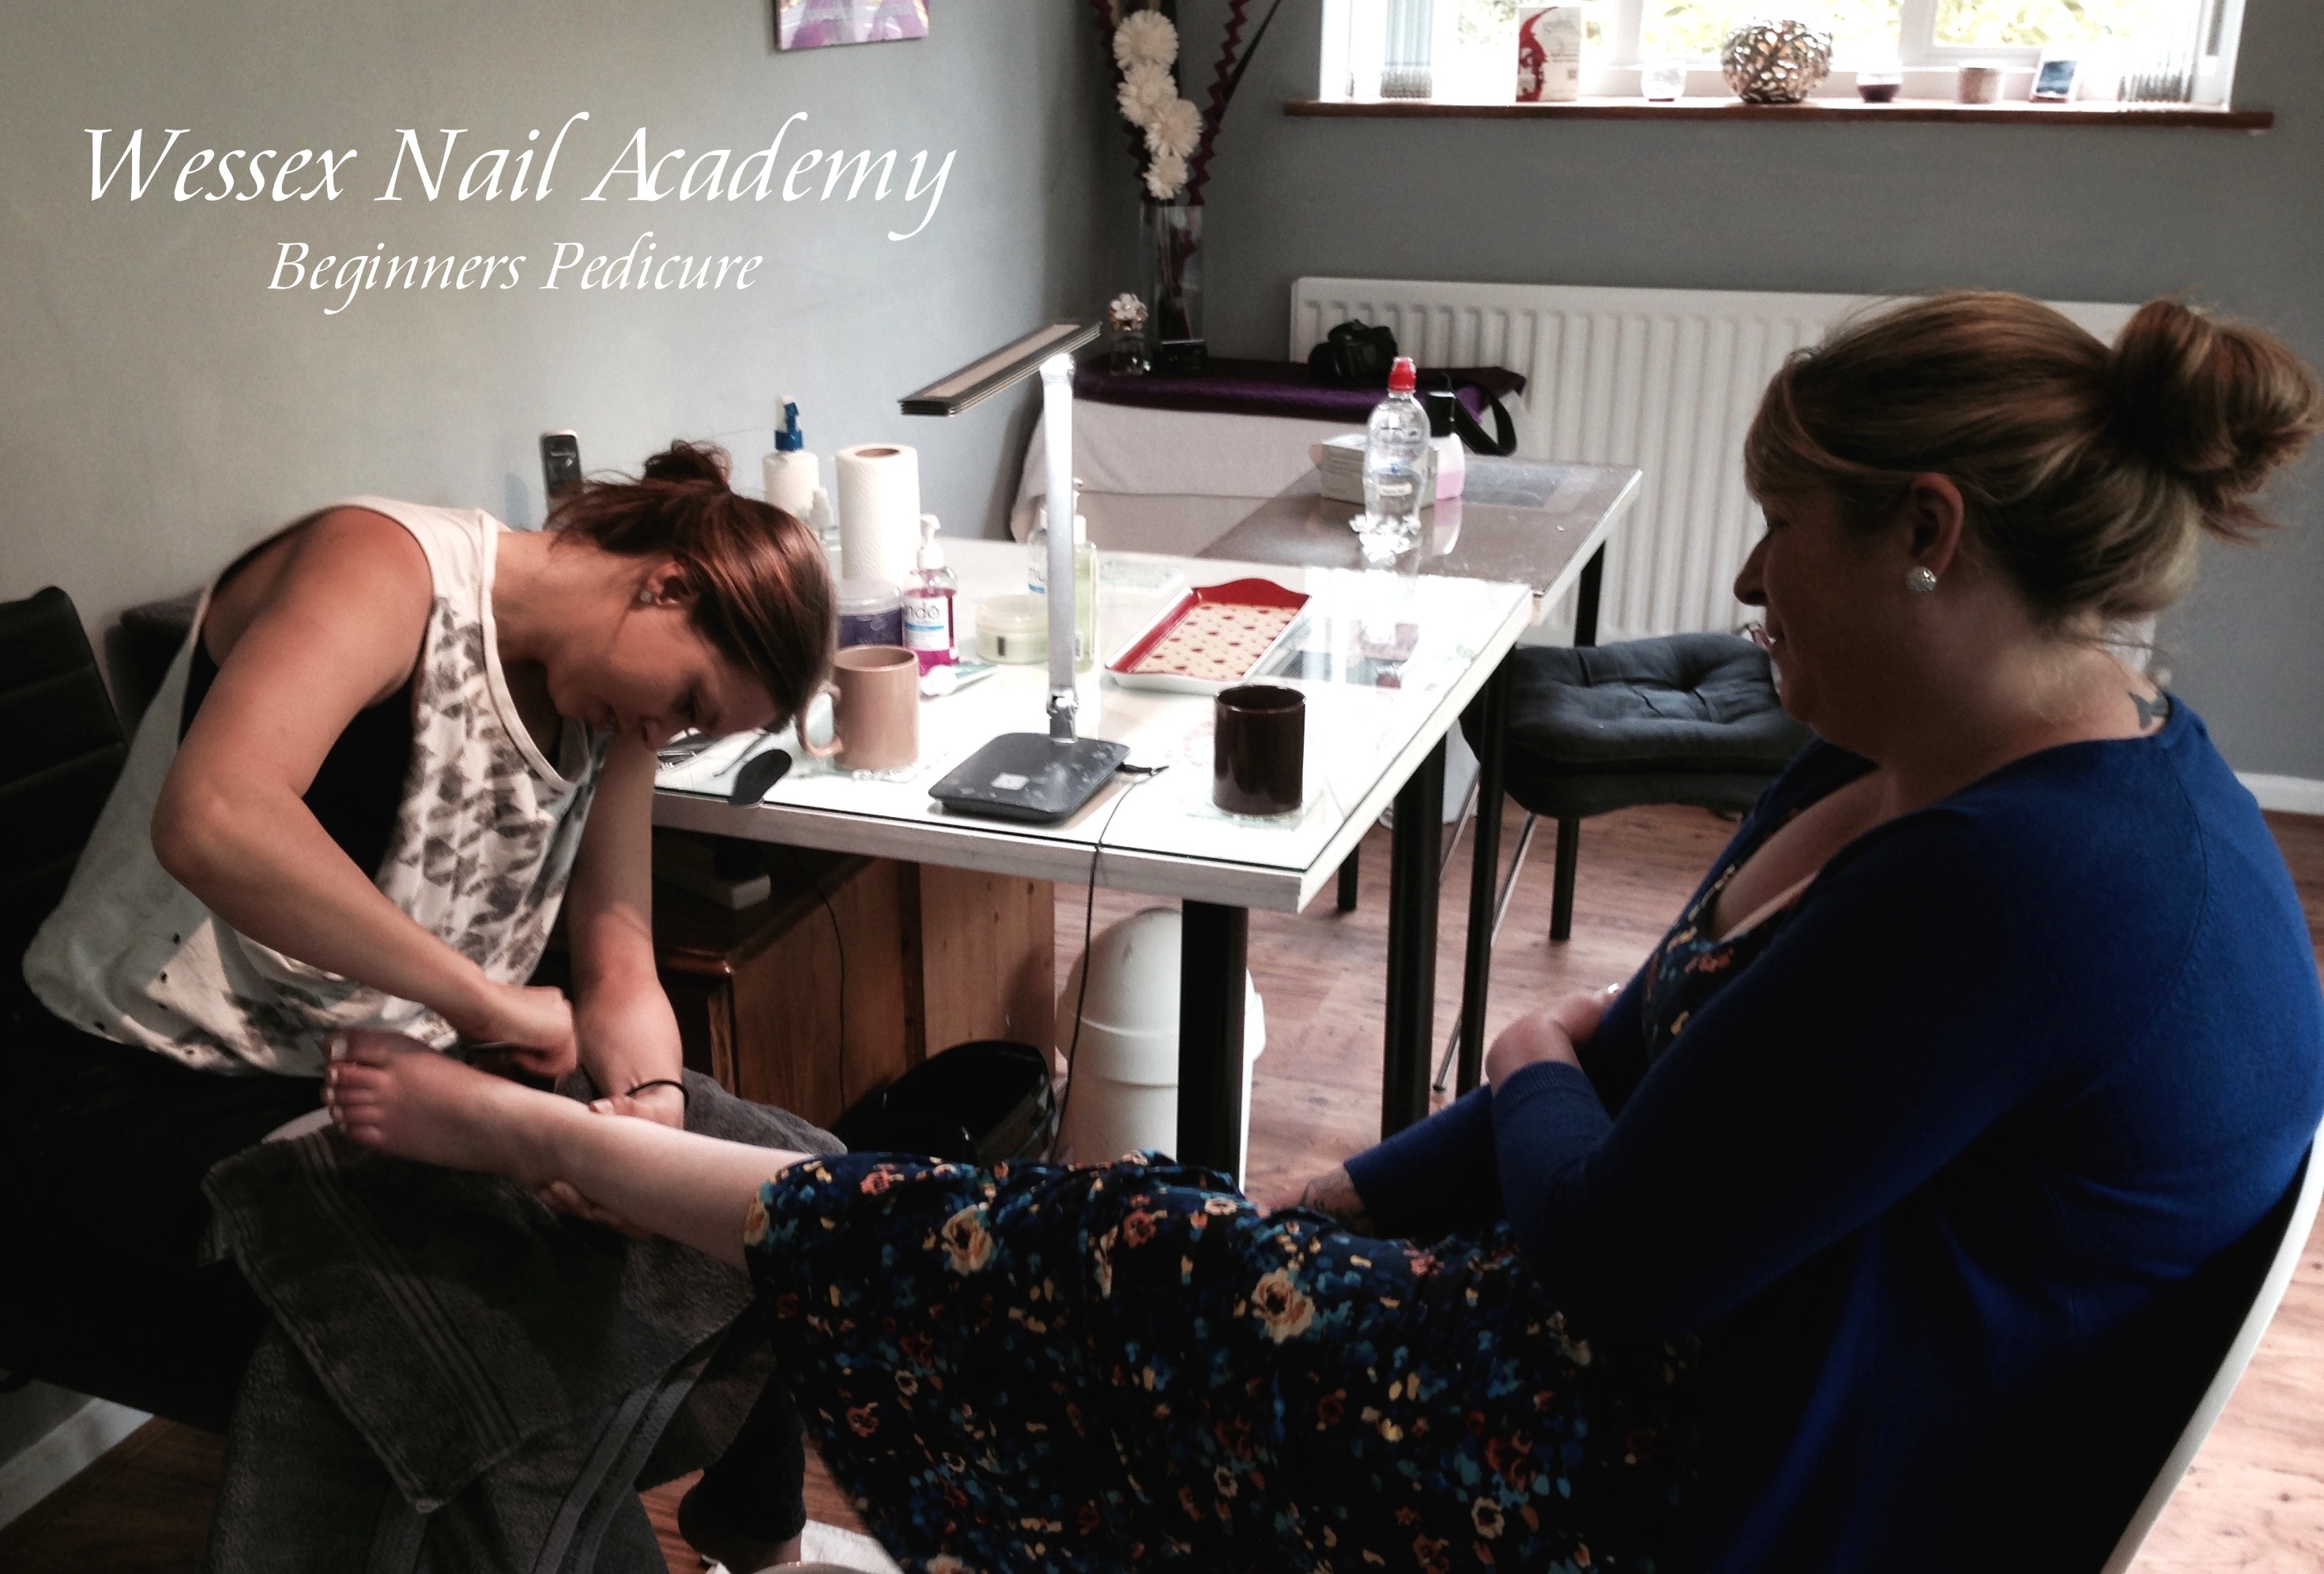 Beginners Manicure and Pedicure Course, Nail extension training, nail training course, Wessex Nail Academy Okeford Fitzpaine, Dorset